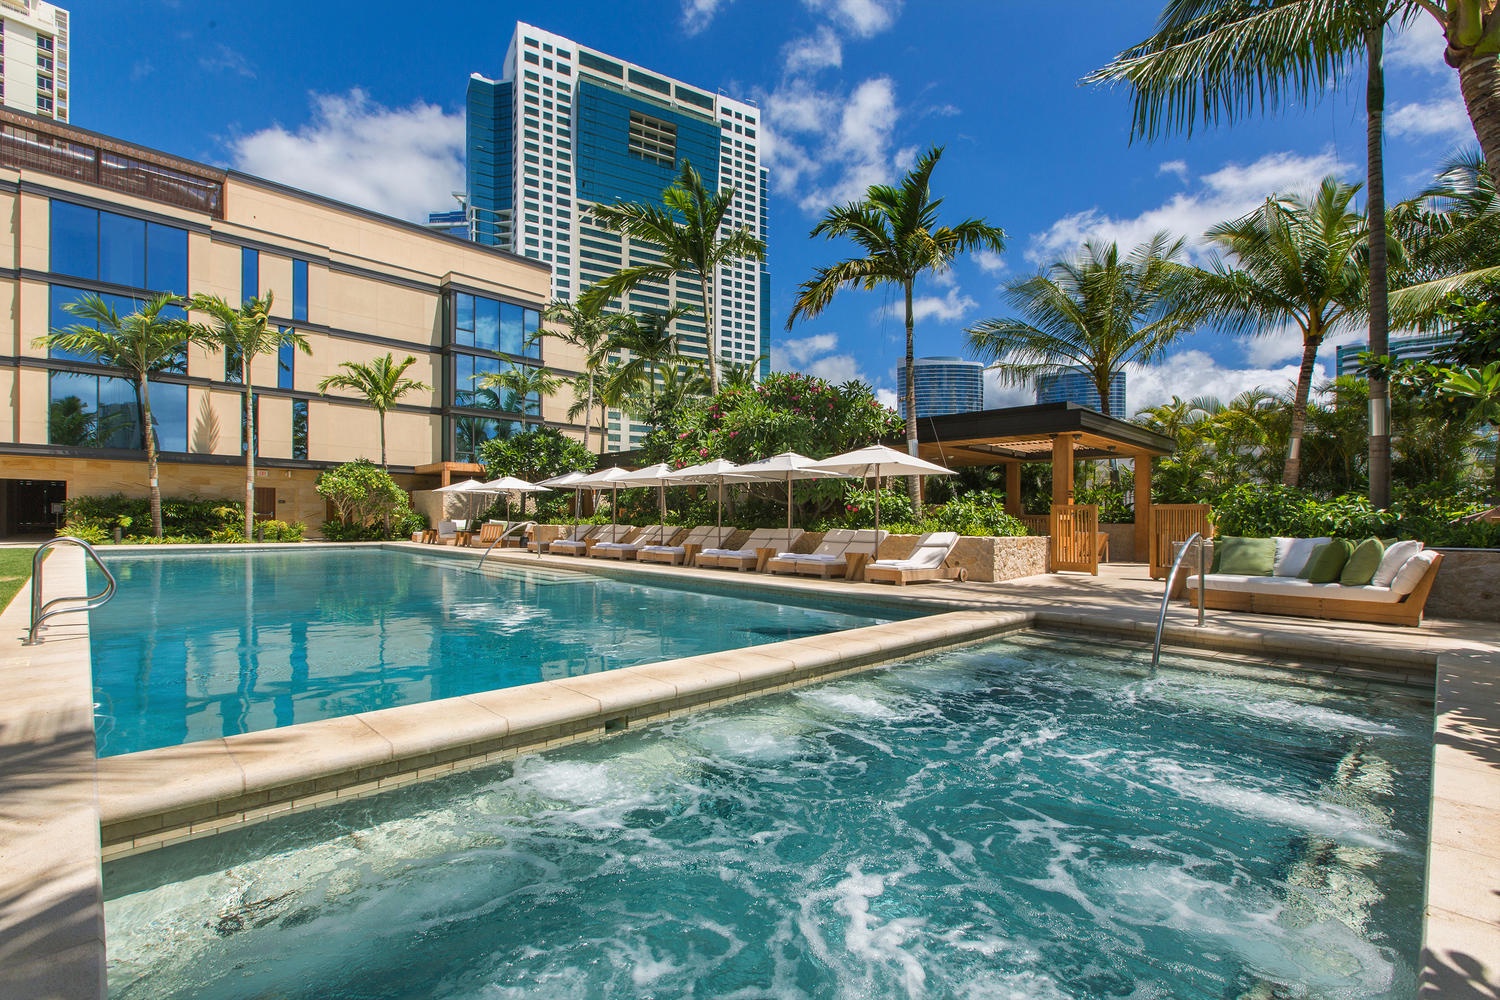 Honolulu Vacation Rentals, Park Lane Palm Resort - Shared Jacuzzi and Pool